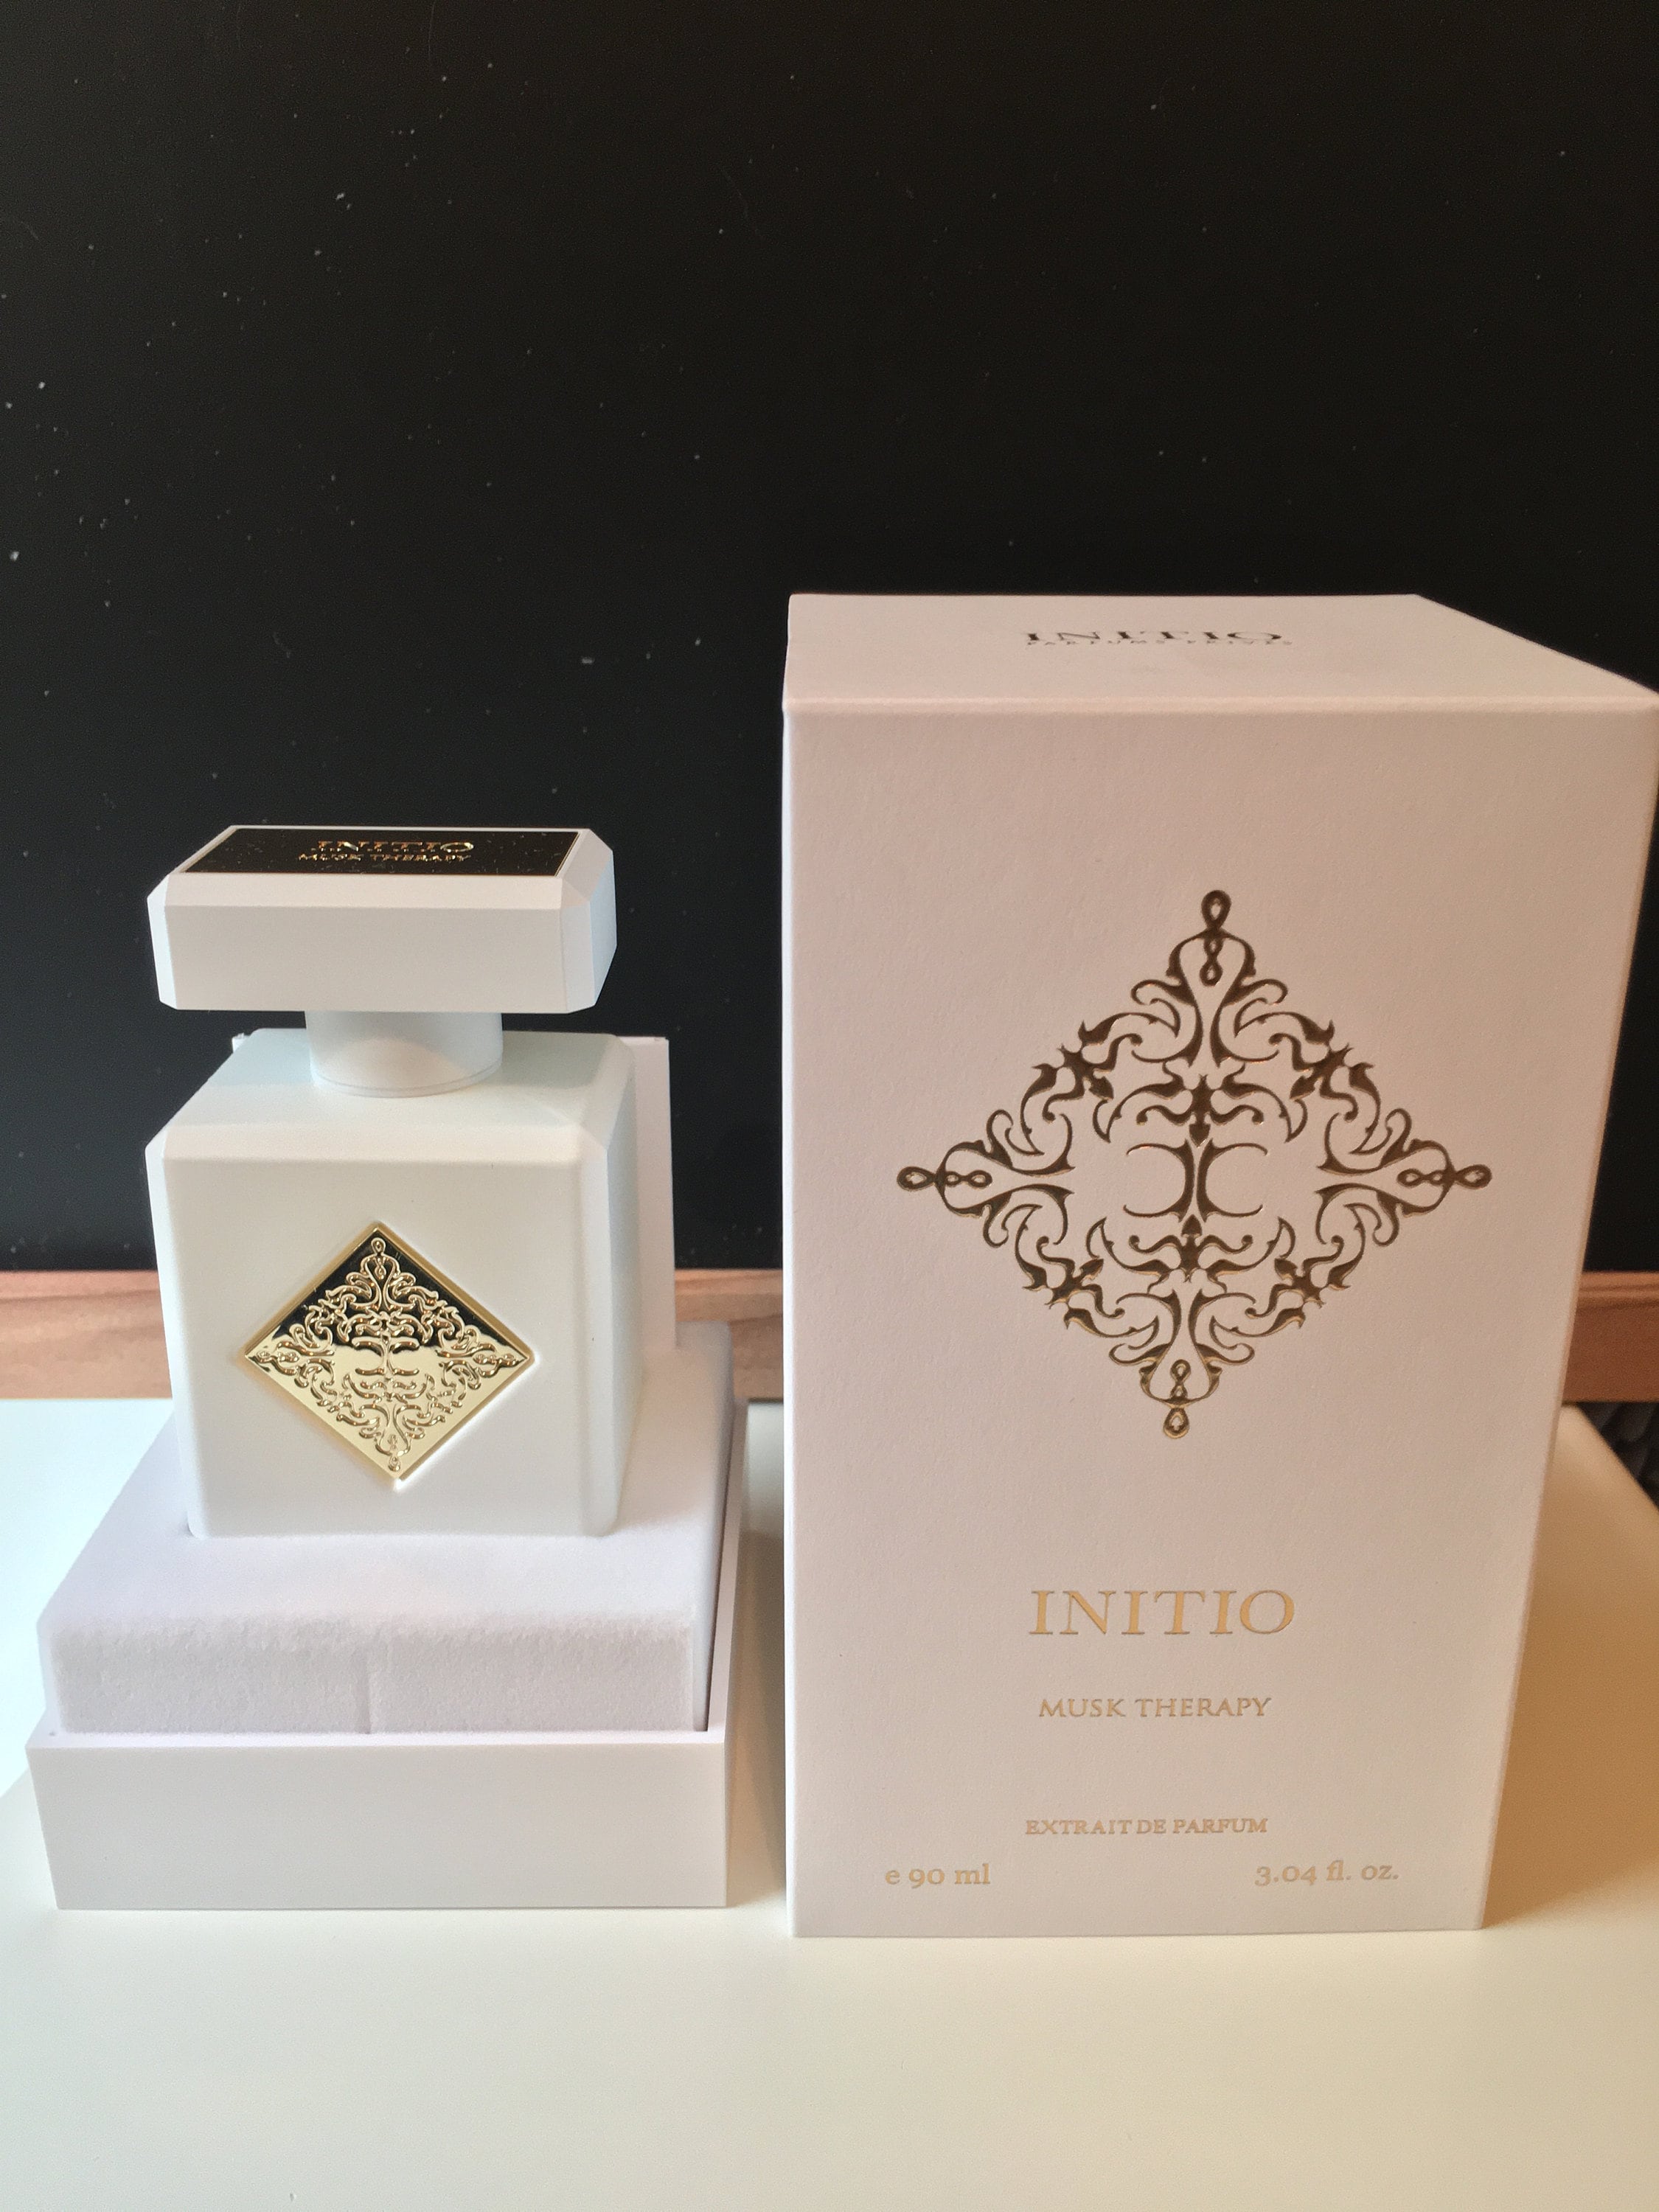 Initio Absolute Aphrodisiac Authentic Spray Long-lasting Authentic Perfume  for Women and Men Sample Size Travel Decant 5ml 10ml -  Hong Kong